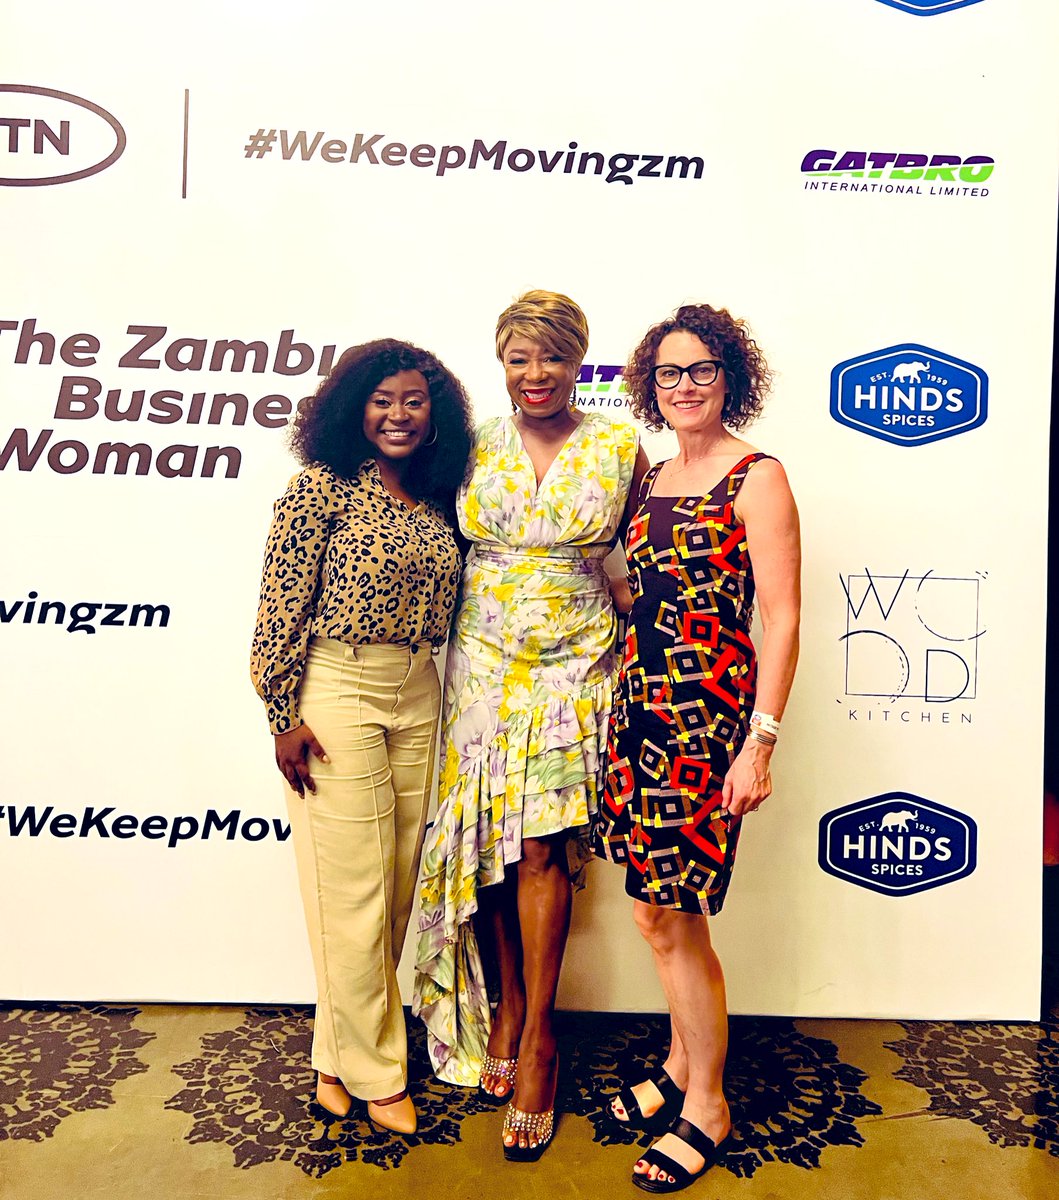 Met @DrFredaBrazle  (middle) last year at the @Zambiandiaspora Conference and now claiming her as a big sis officially. 

So glad to see you today and we’ll talk soon! 🤗

#WeKeepMovingZM #MTNBusinessZambia #ZambianBusinessWoman #WoodKitchenZM